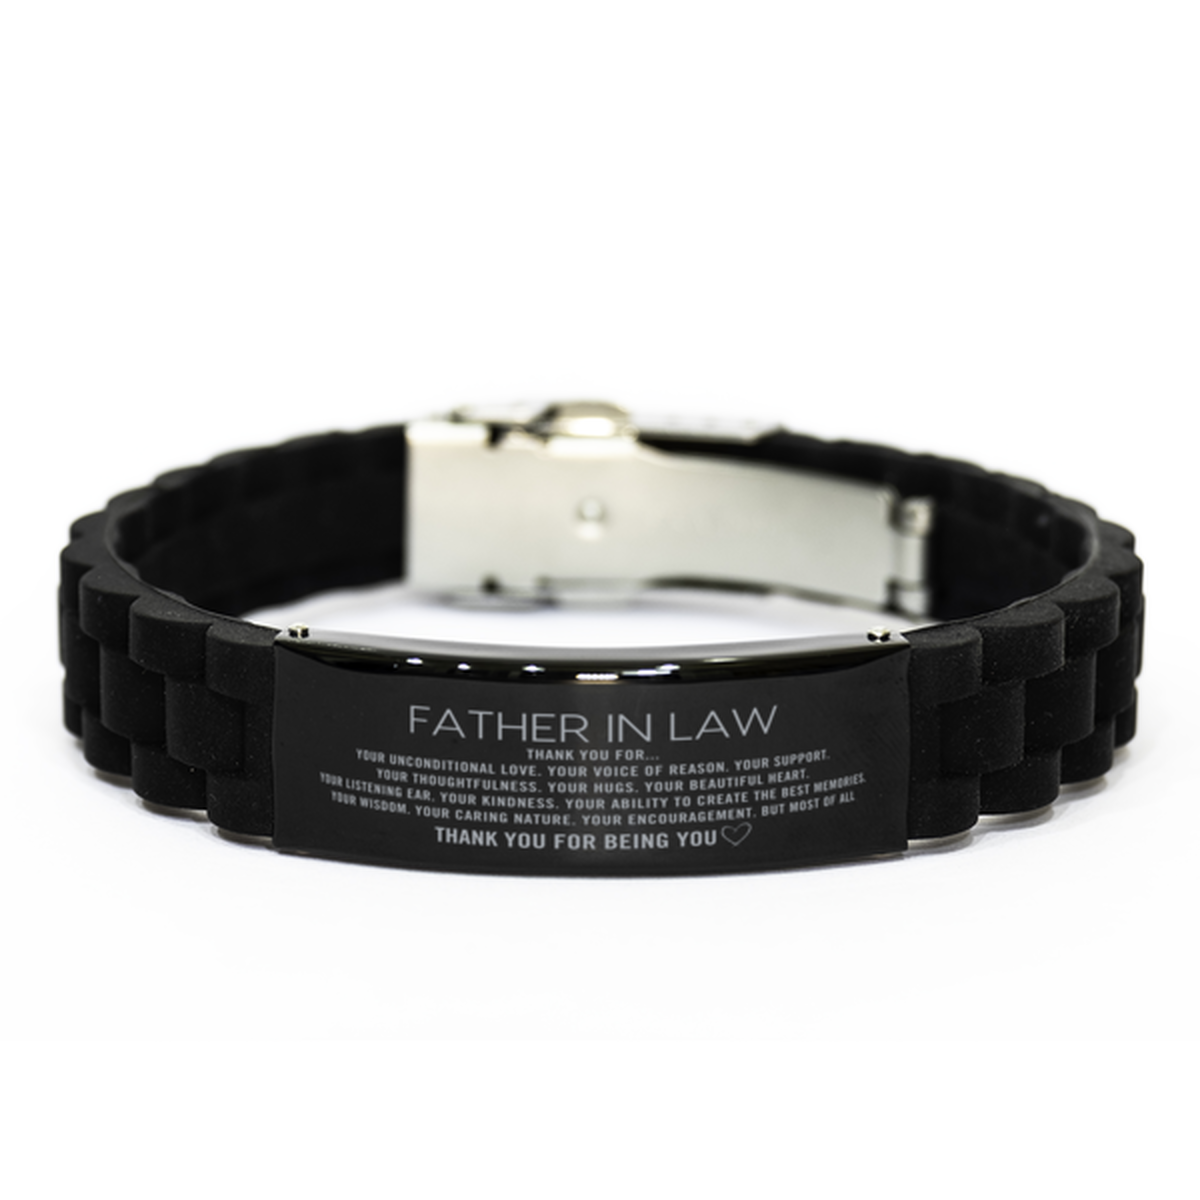 Father In Law Black Glidelock Clasp Bracelet Custom, Engraved Gifts For Father In Law Christmas Graduation Birthday Gifts for Men Women Father In Law Thank you for Your unconditional love